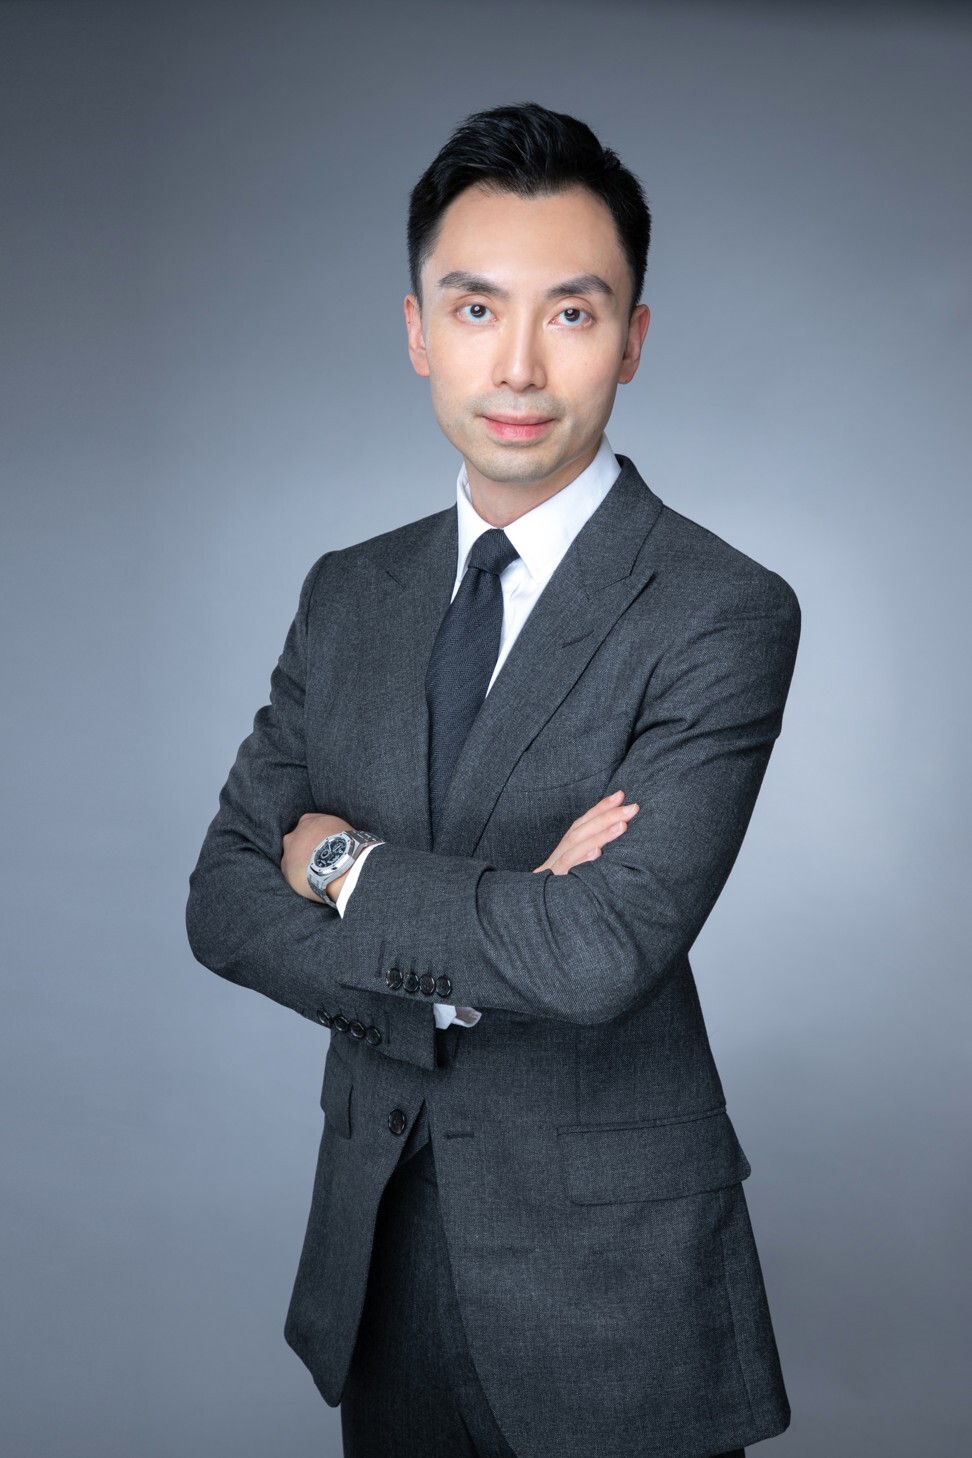 Jonathan Lin, co-founder of Hong Kong's L2 Capital Management and CEO of Magnum Opus Acquisition. Photo: Handout